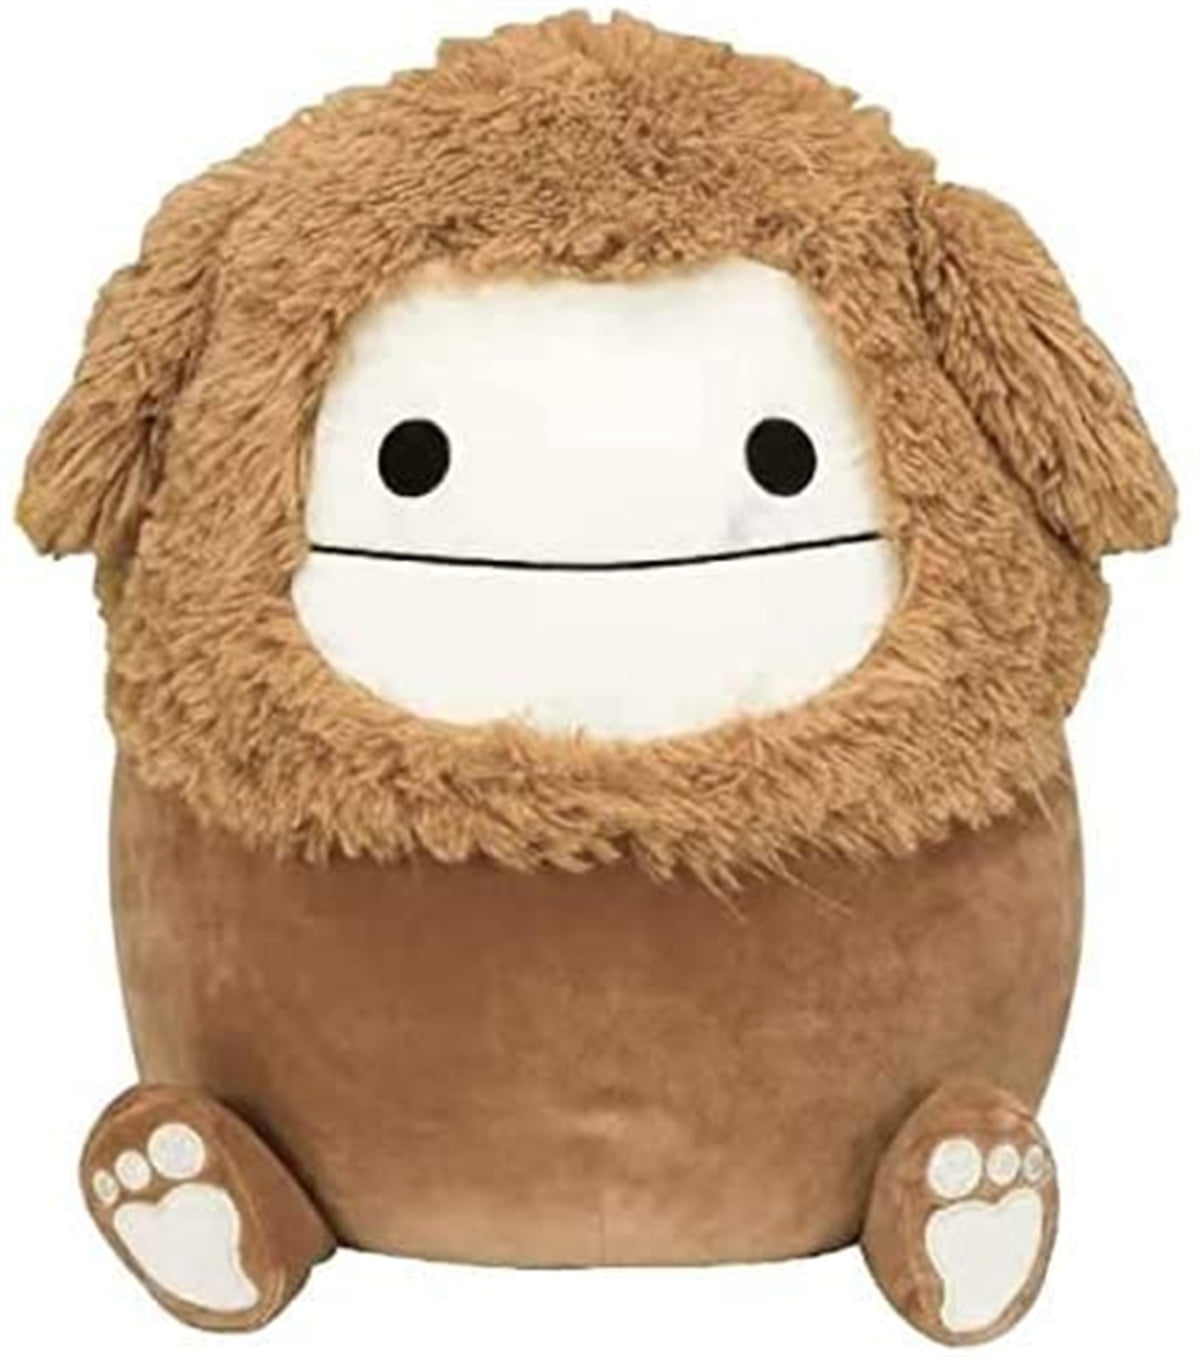 Squishmallow 8 inch Otter Plush Pillow Toy Brown